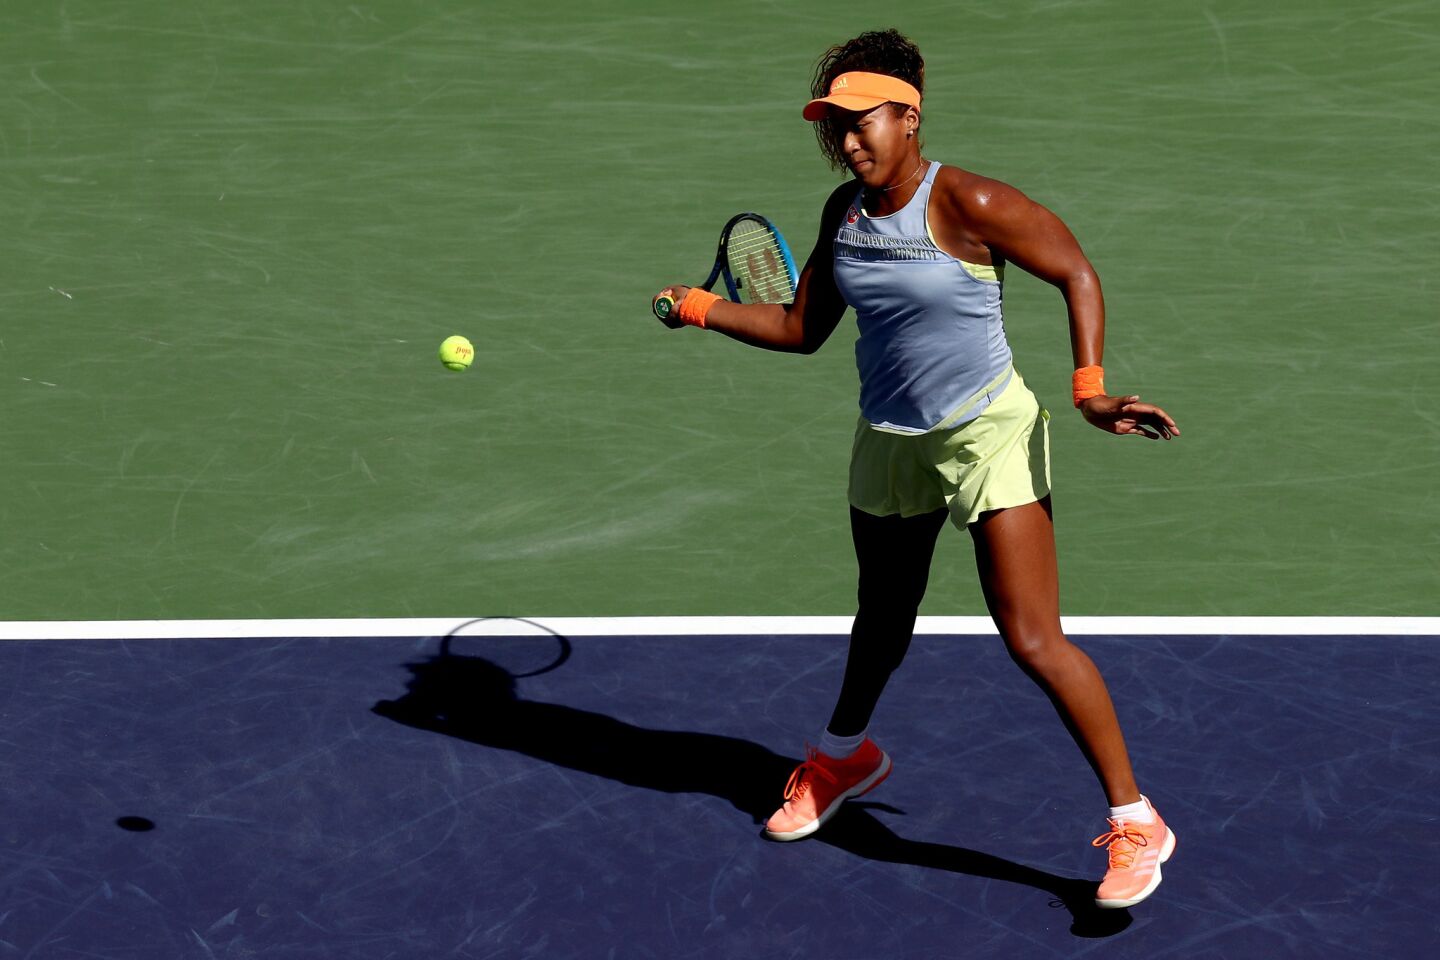 INDIAN WELLS, CA - MARCH 18: Naomi Osaka of Japan returns a shot to Daria Kasatkina of Russia during the women's final on Day 14 of the BNP Paribas Open at the Indian Wells Tennis Garden on March 18, 2018 in Indian Wells, California. (Photo by Matthew Stockman/Getty Images) ** OUTS - ELSENT, FPG, CM - OUTS * NM, PH, VA if sourced by CT, LA or MoD **